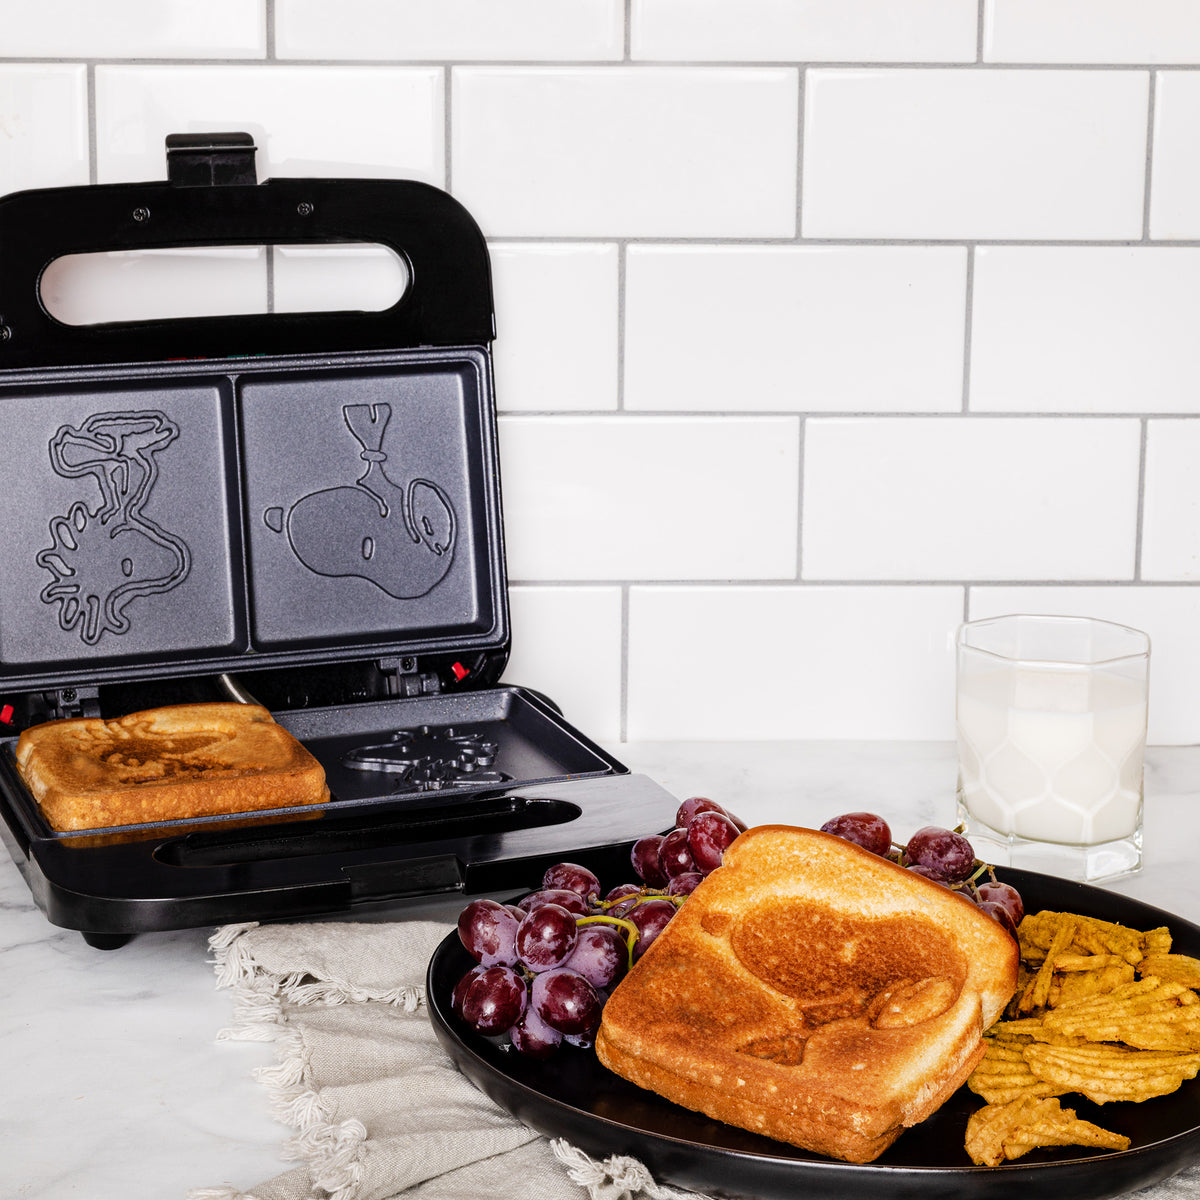 Grilled Cheese Maker - Sandwich Maker that is easy to use and store